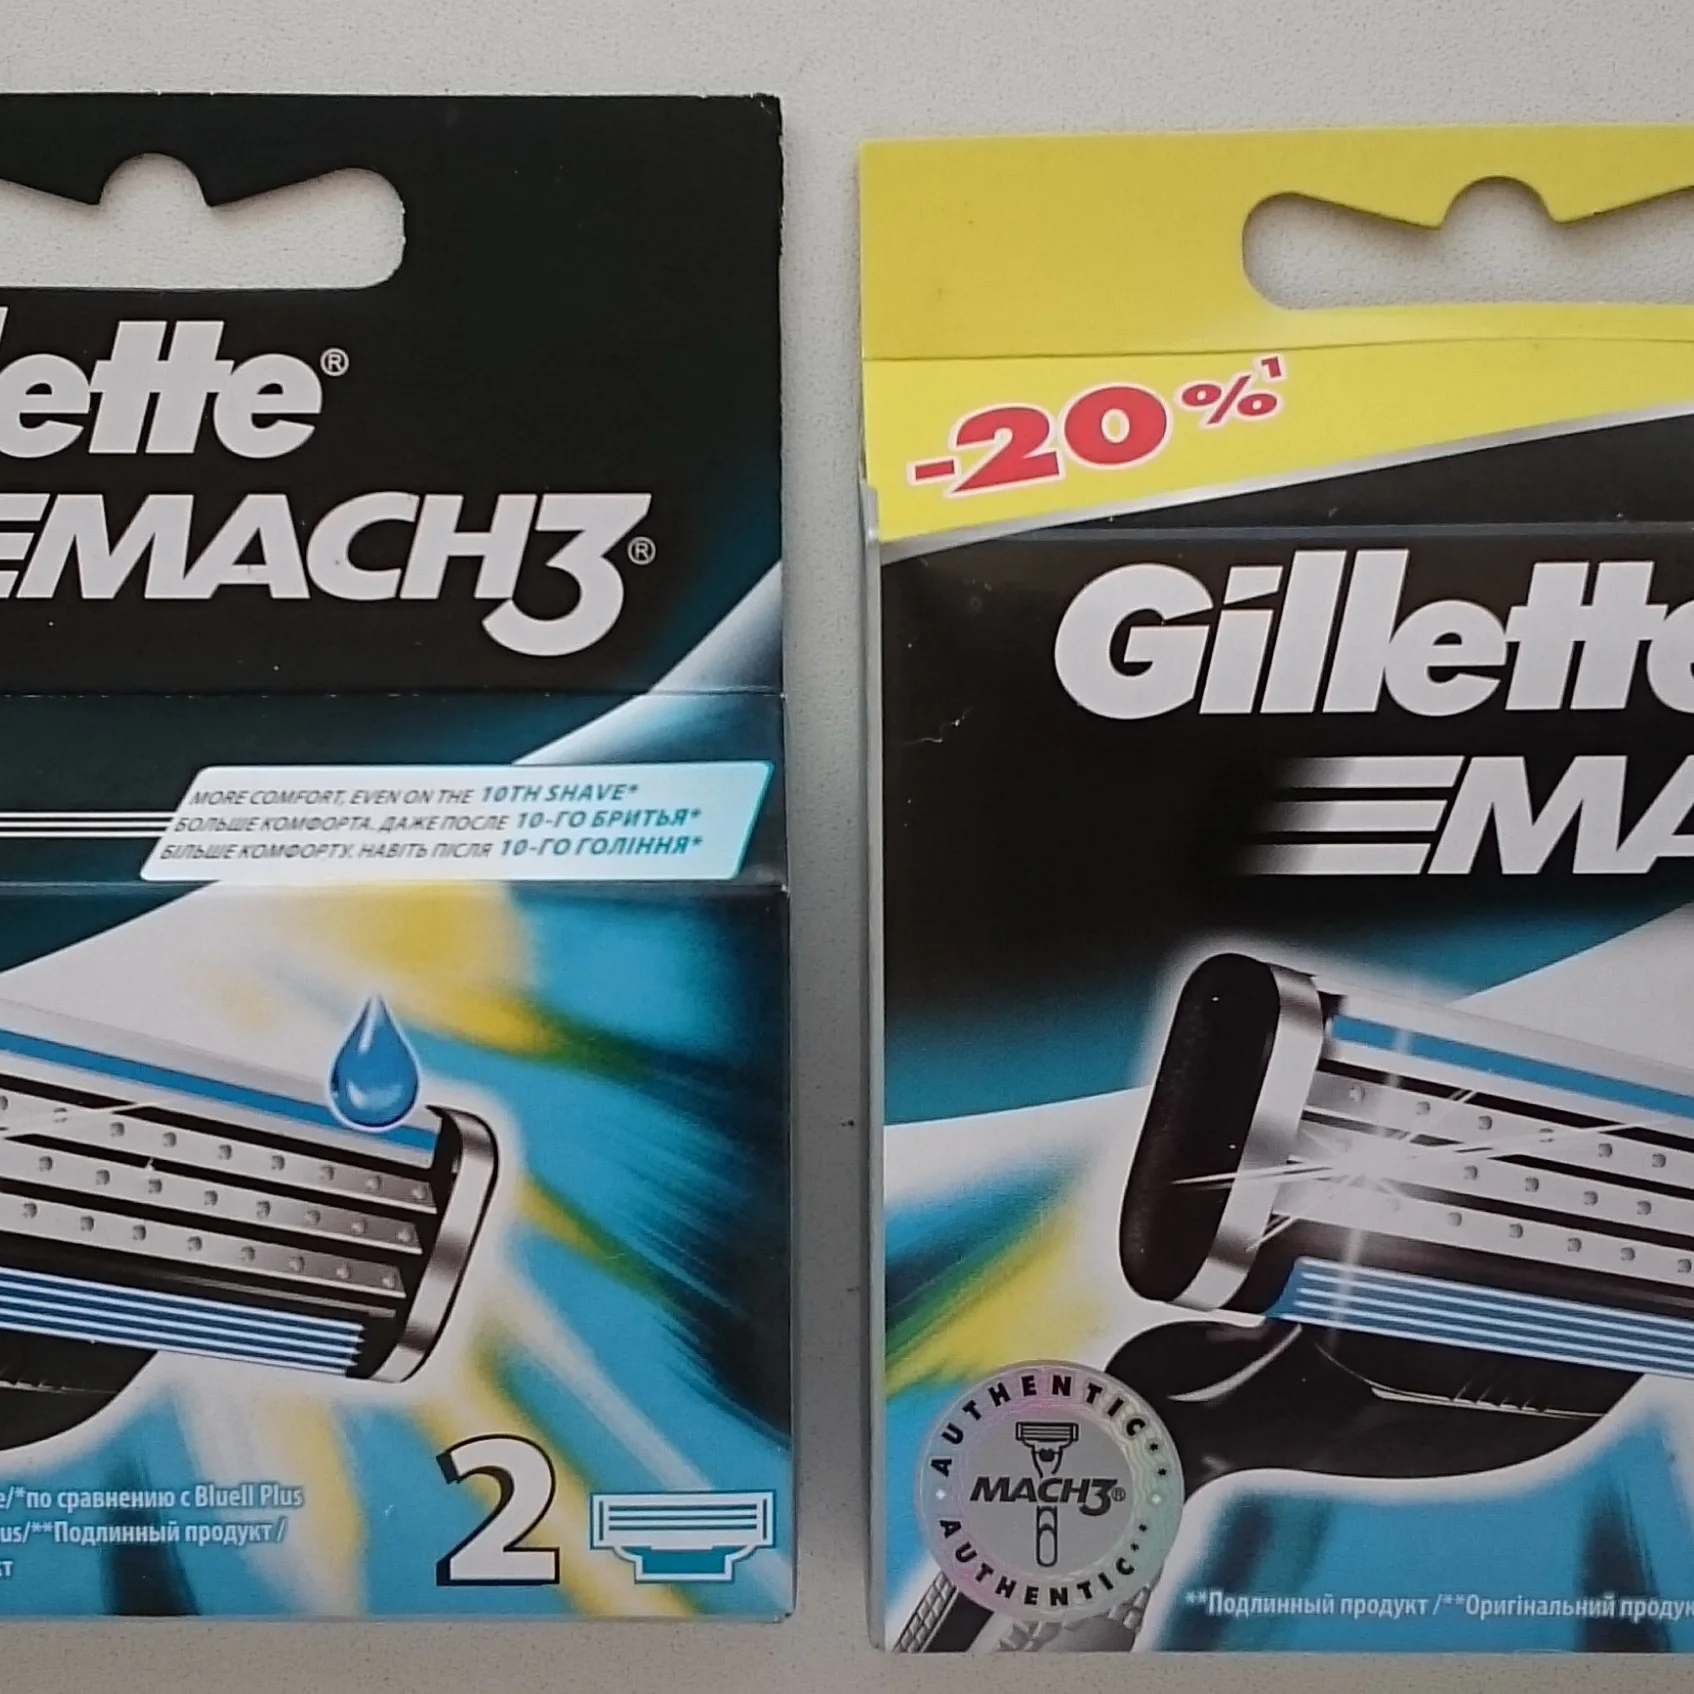 Replacement Gillette MACH3 cassettes of high Premium quality!